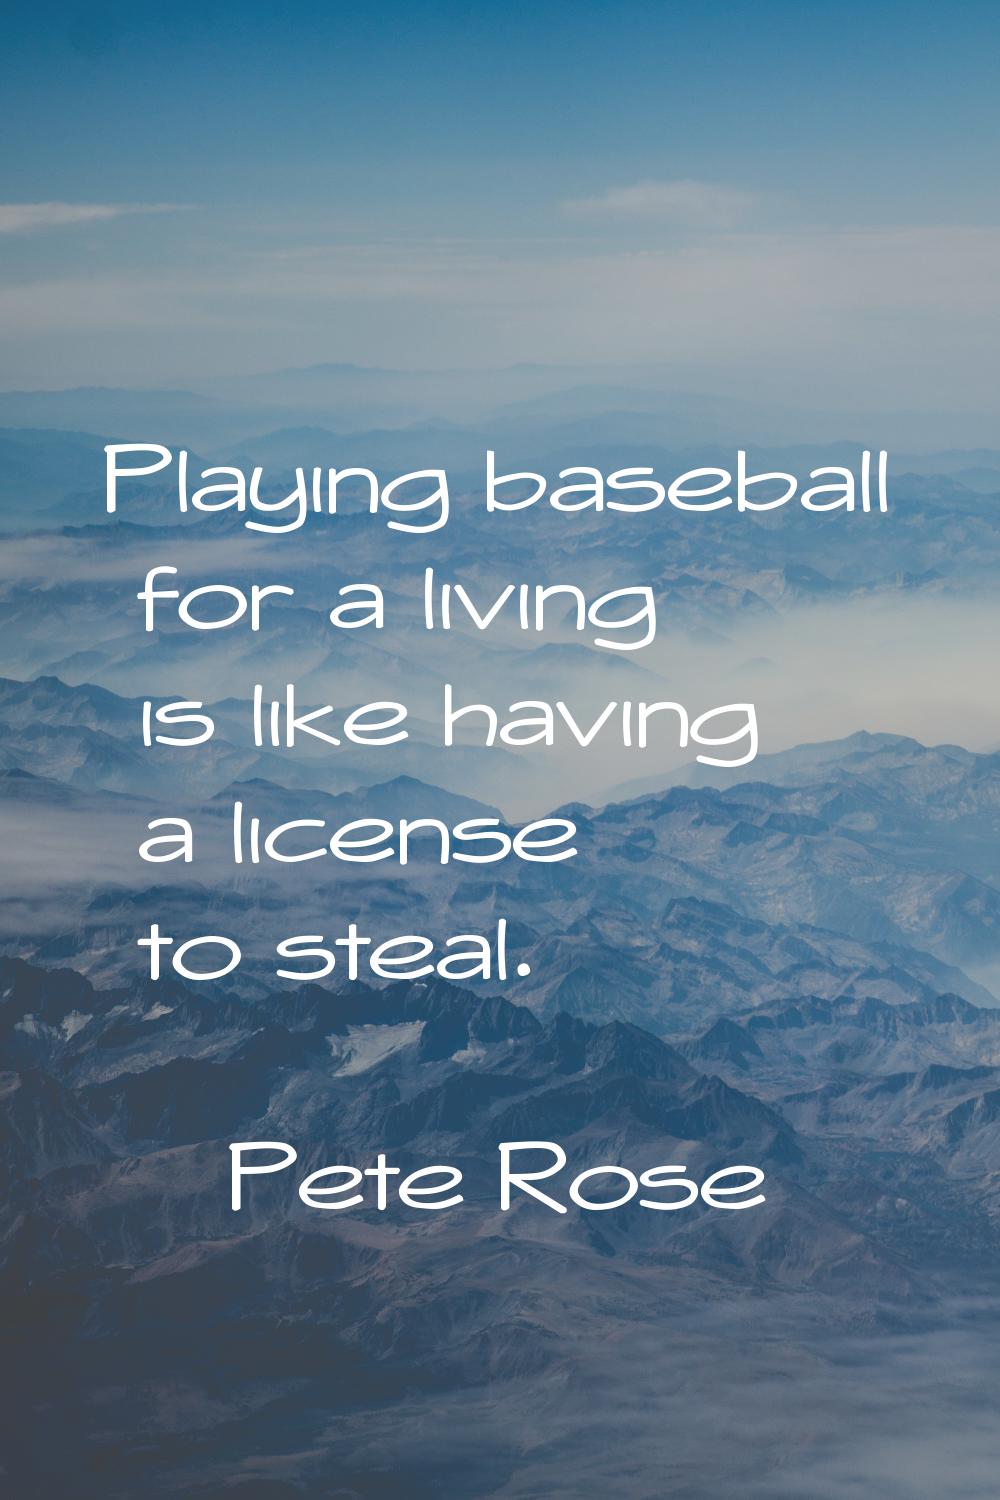 Playing baseball for a living is like having a license to steal.